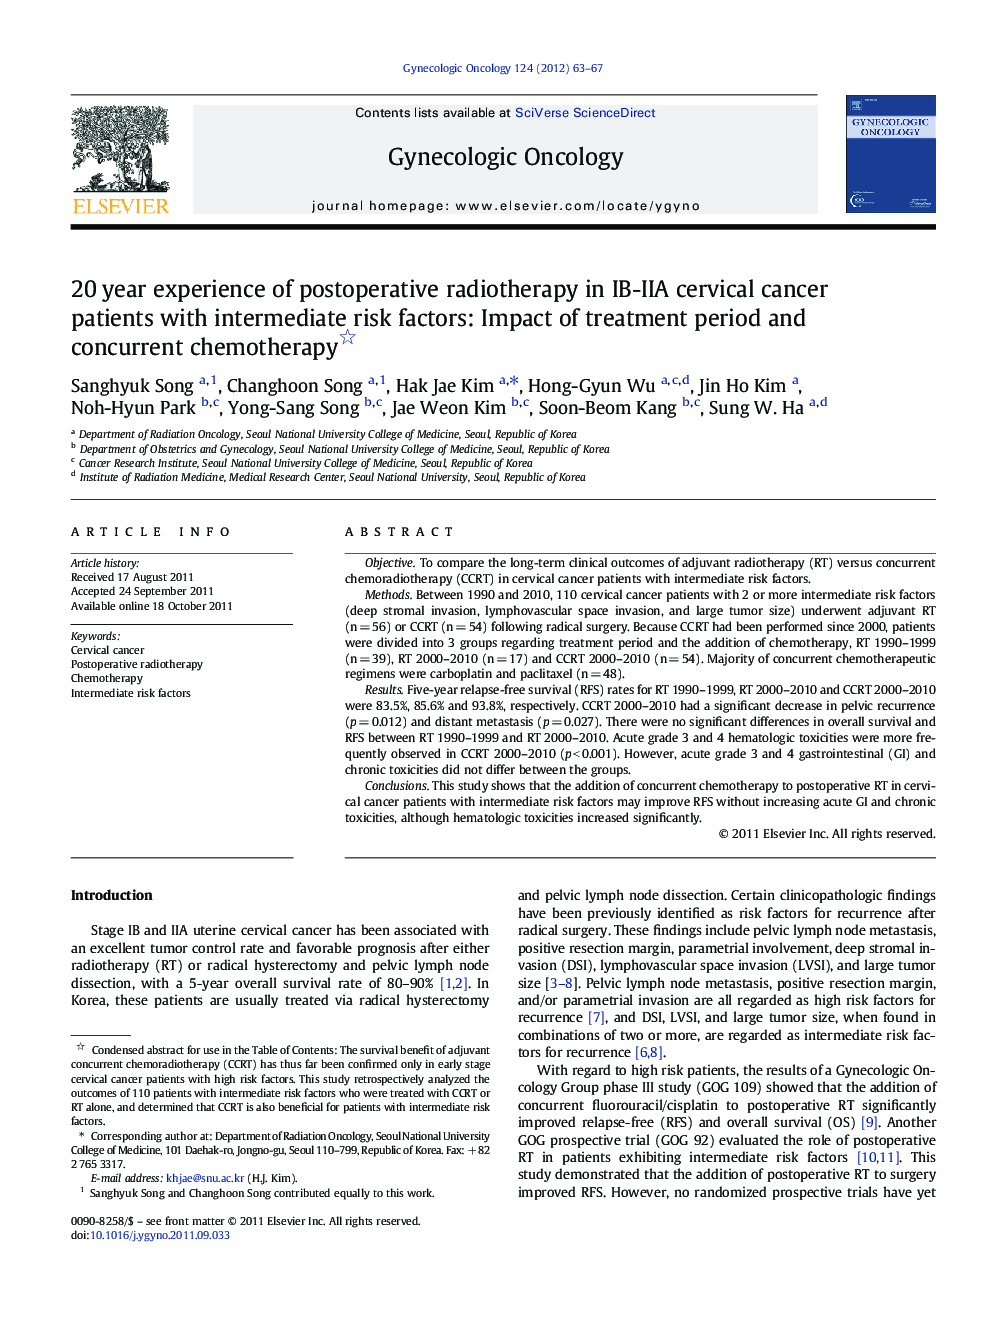 20Â year experience of postoperative radiotherapy in IB-IIA cervical cancer patients with intermediate risk factors: Impact of treatment period and concurrent chemotherapy